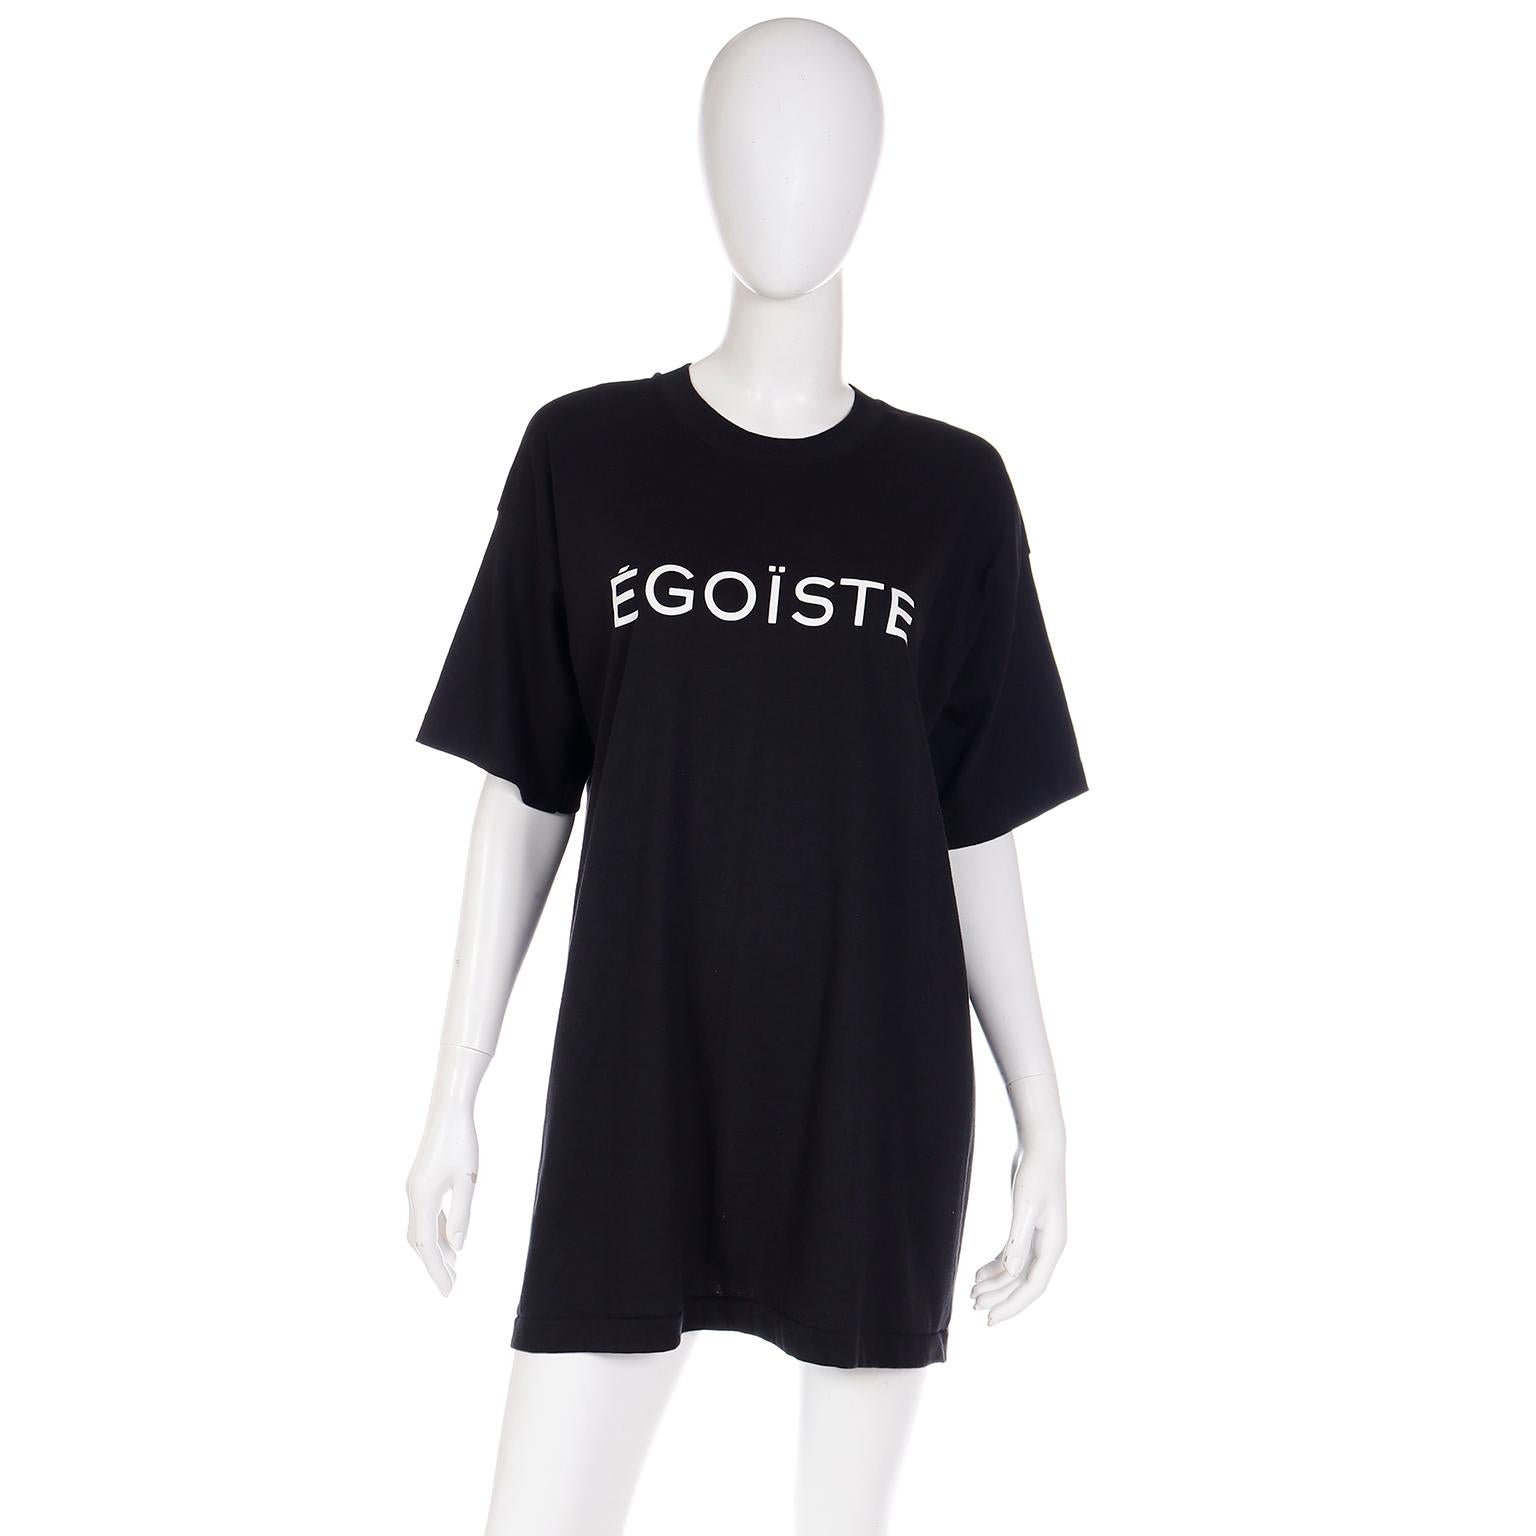 When Chanel released its Égoïste men's fragrance in 1990, it also released, as part of the campaign, a limited number of these remarkable t-shirts. Prokofiev's 